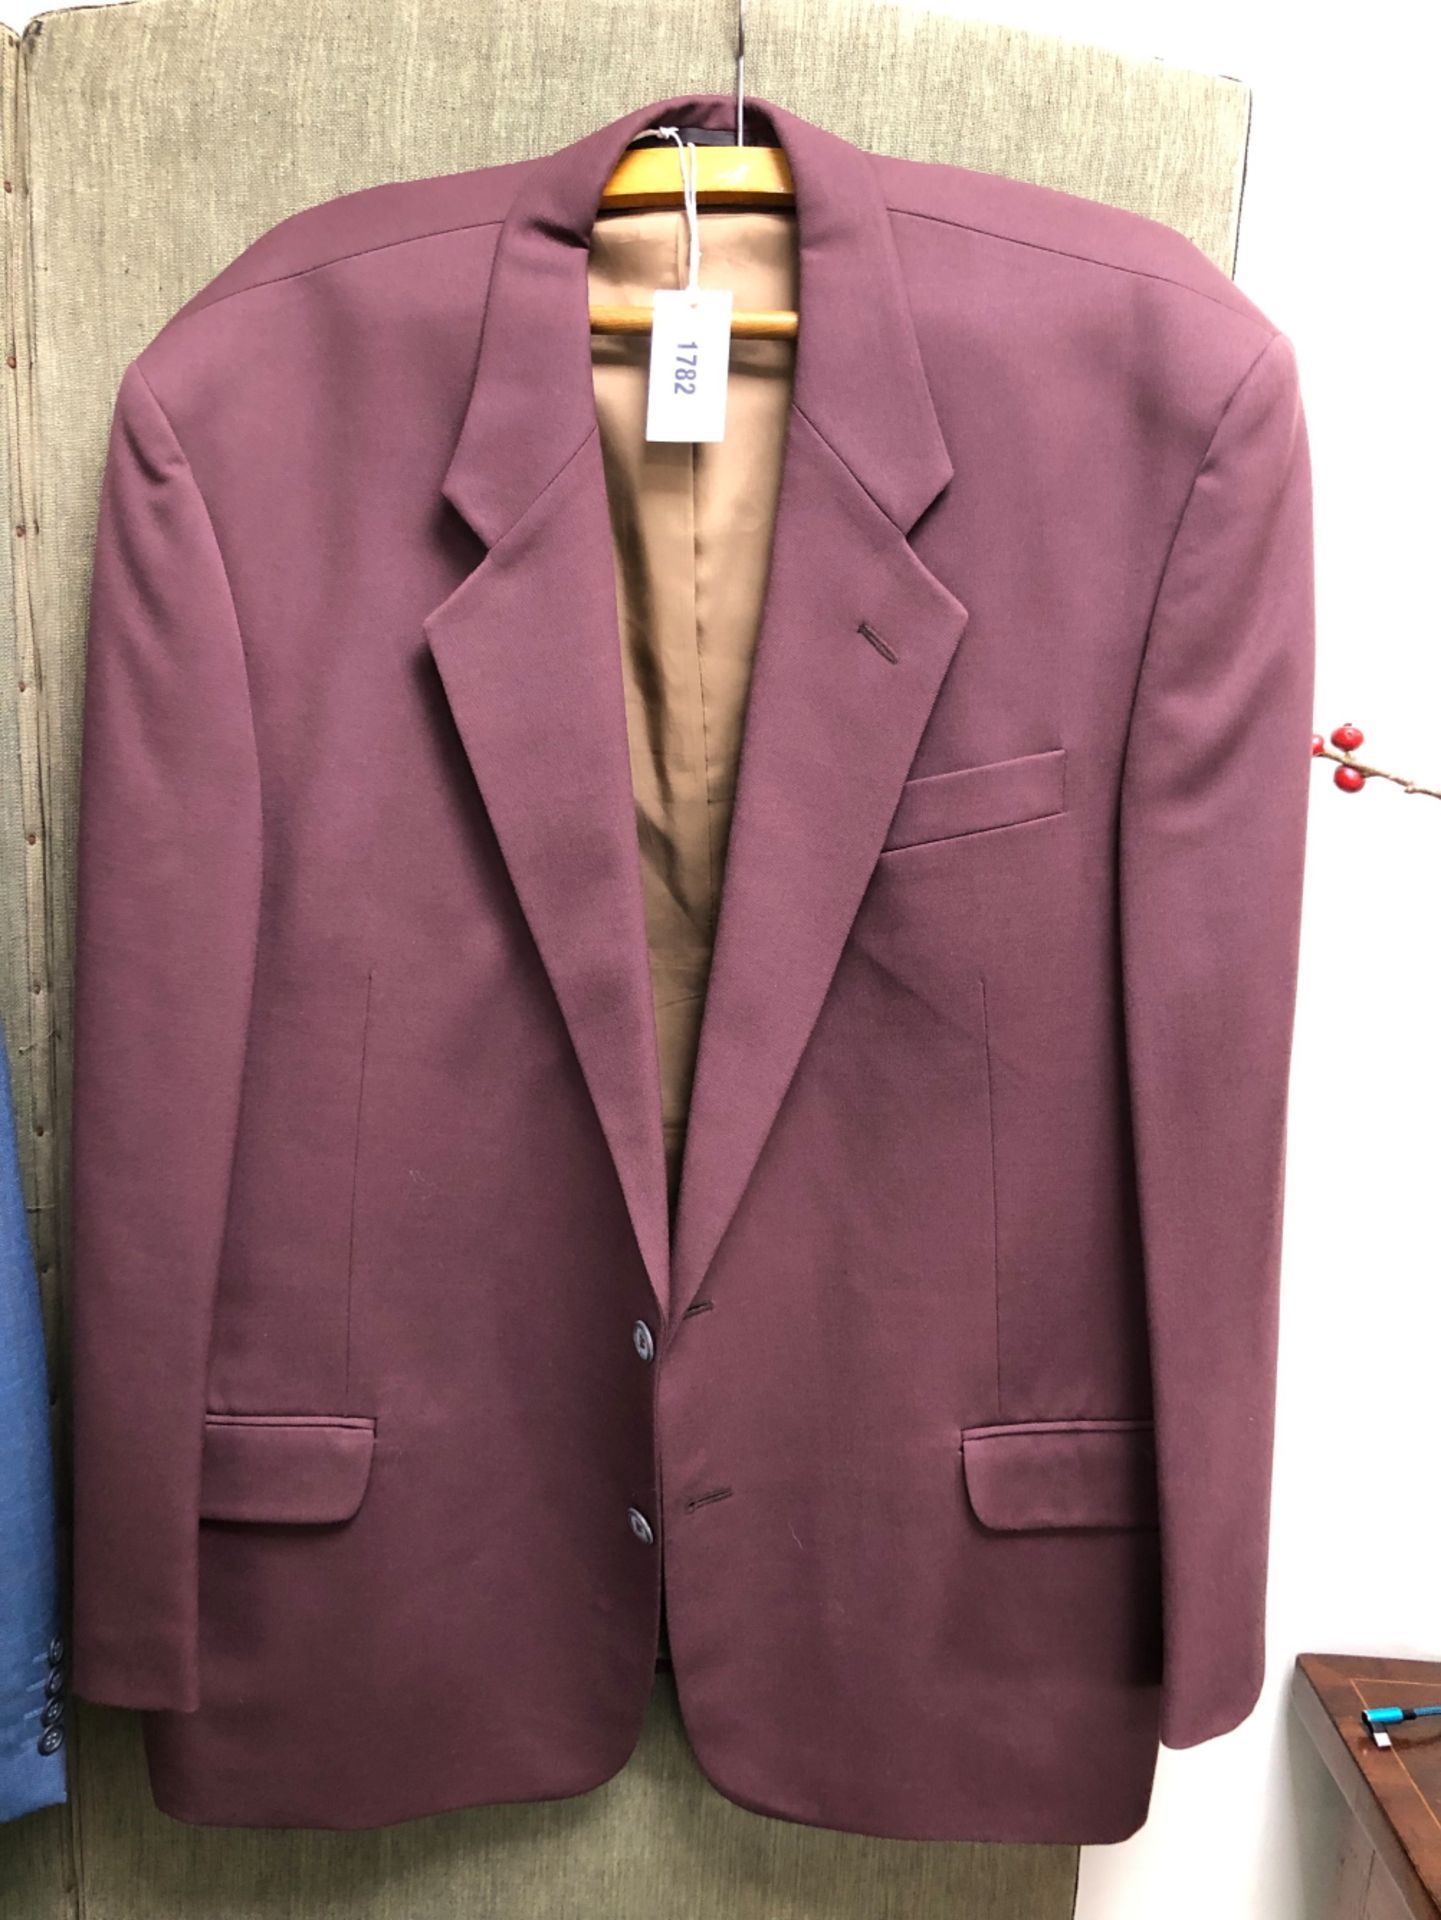 GENTS JACKETS: DEBENHAMS, BROWN WOOL, CHEST 42", A DIGEL, PALE BLUE WOOL WITH SUBTLE BROWN CHECK, - Image 4 of 9